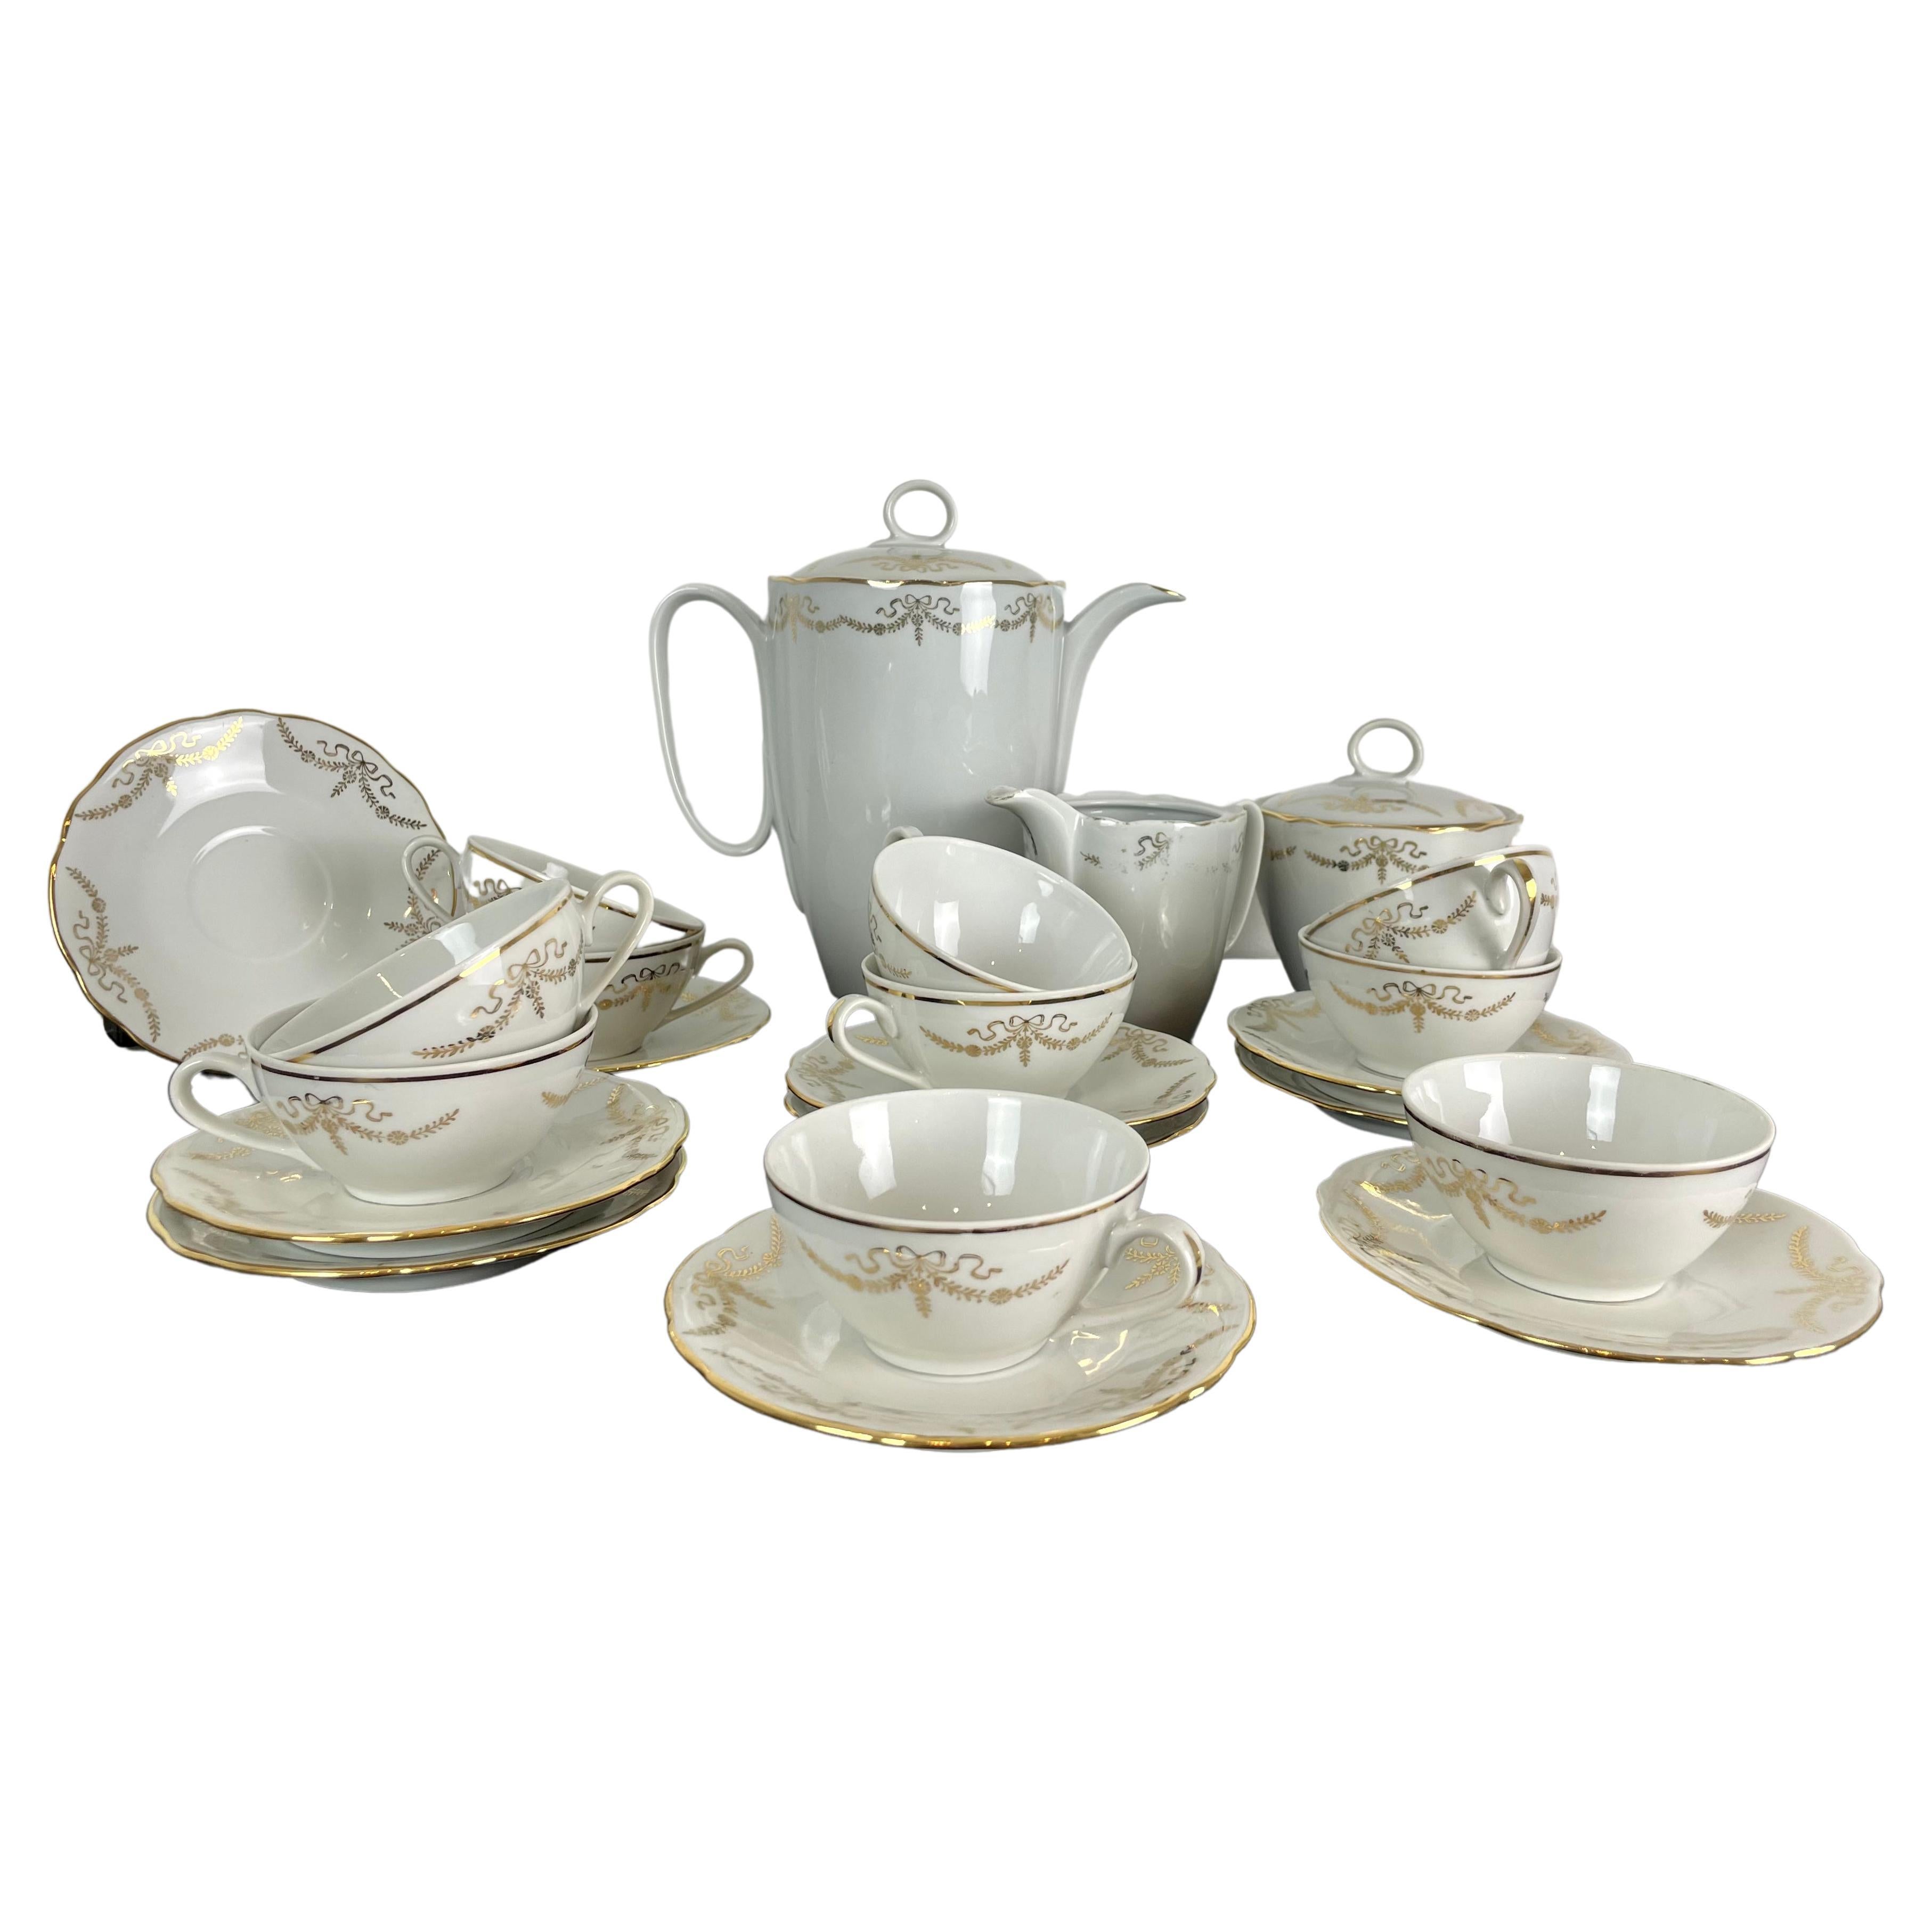 French porcelain Coffee / Tea Service for 10 People